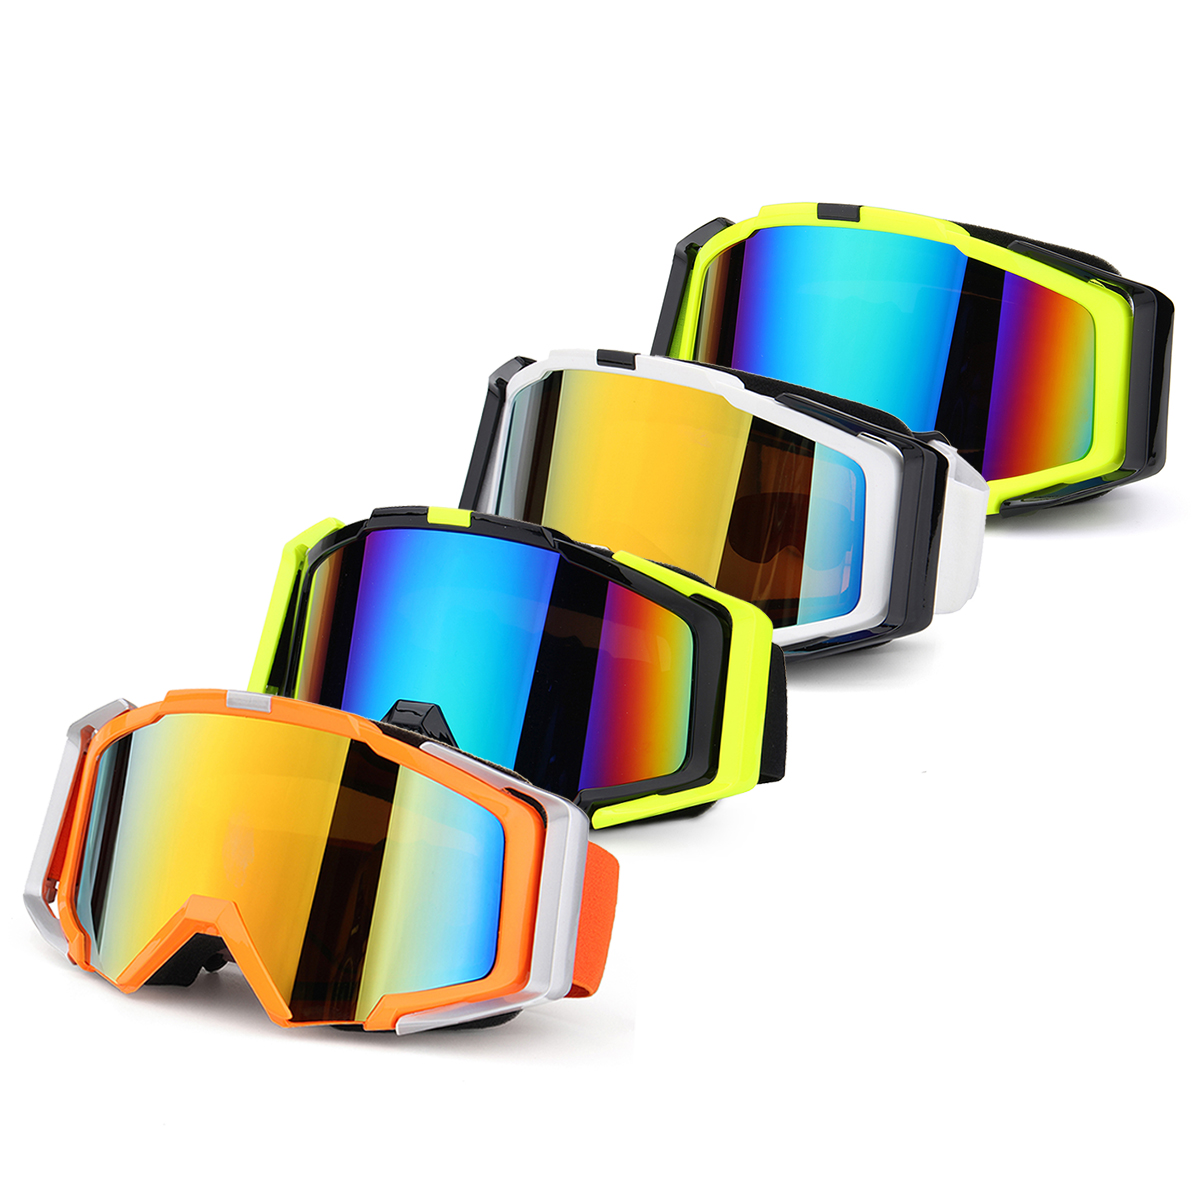 TYX76-Outdoor-Skiing-Skating-Goggles-Snowmobile-Glasses-Windproof-Anti-Fog-UV-Protection-For-Men-Wom-1358893